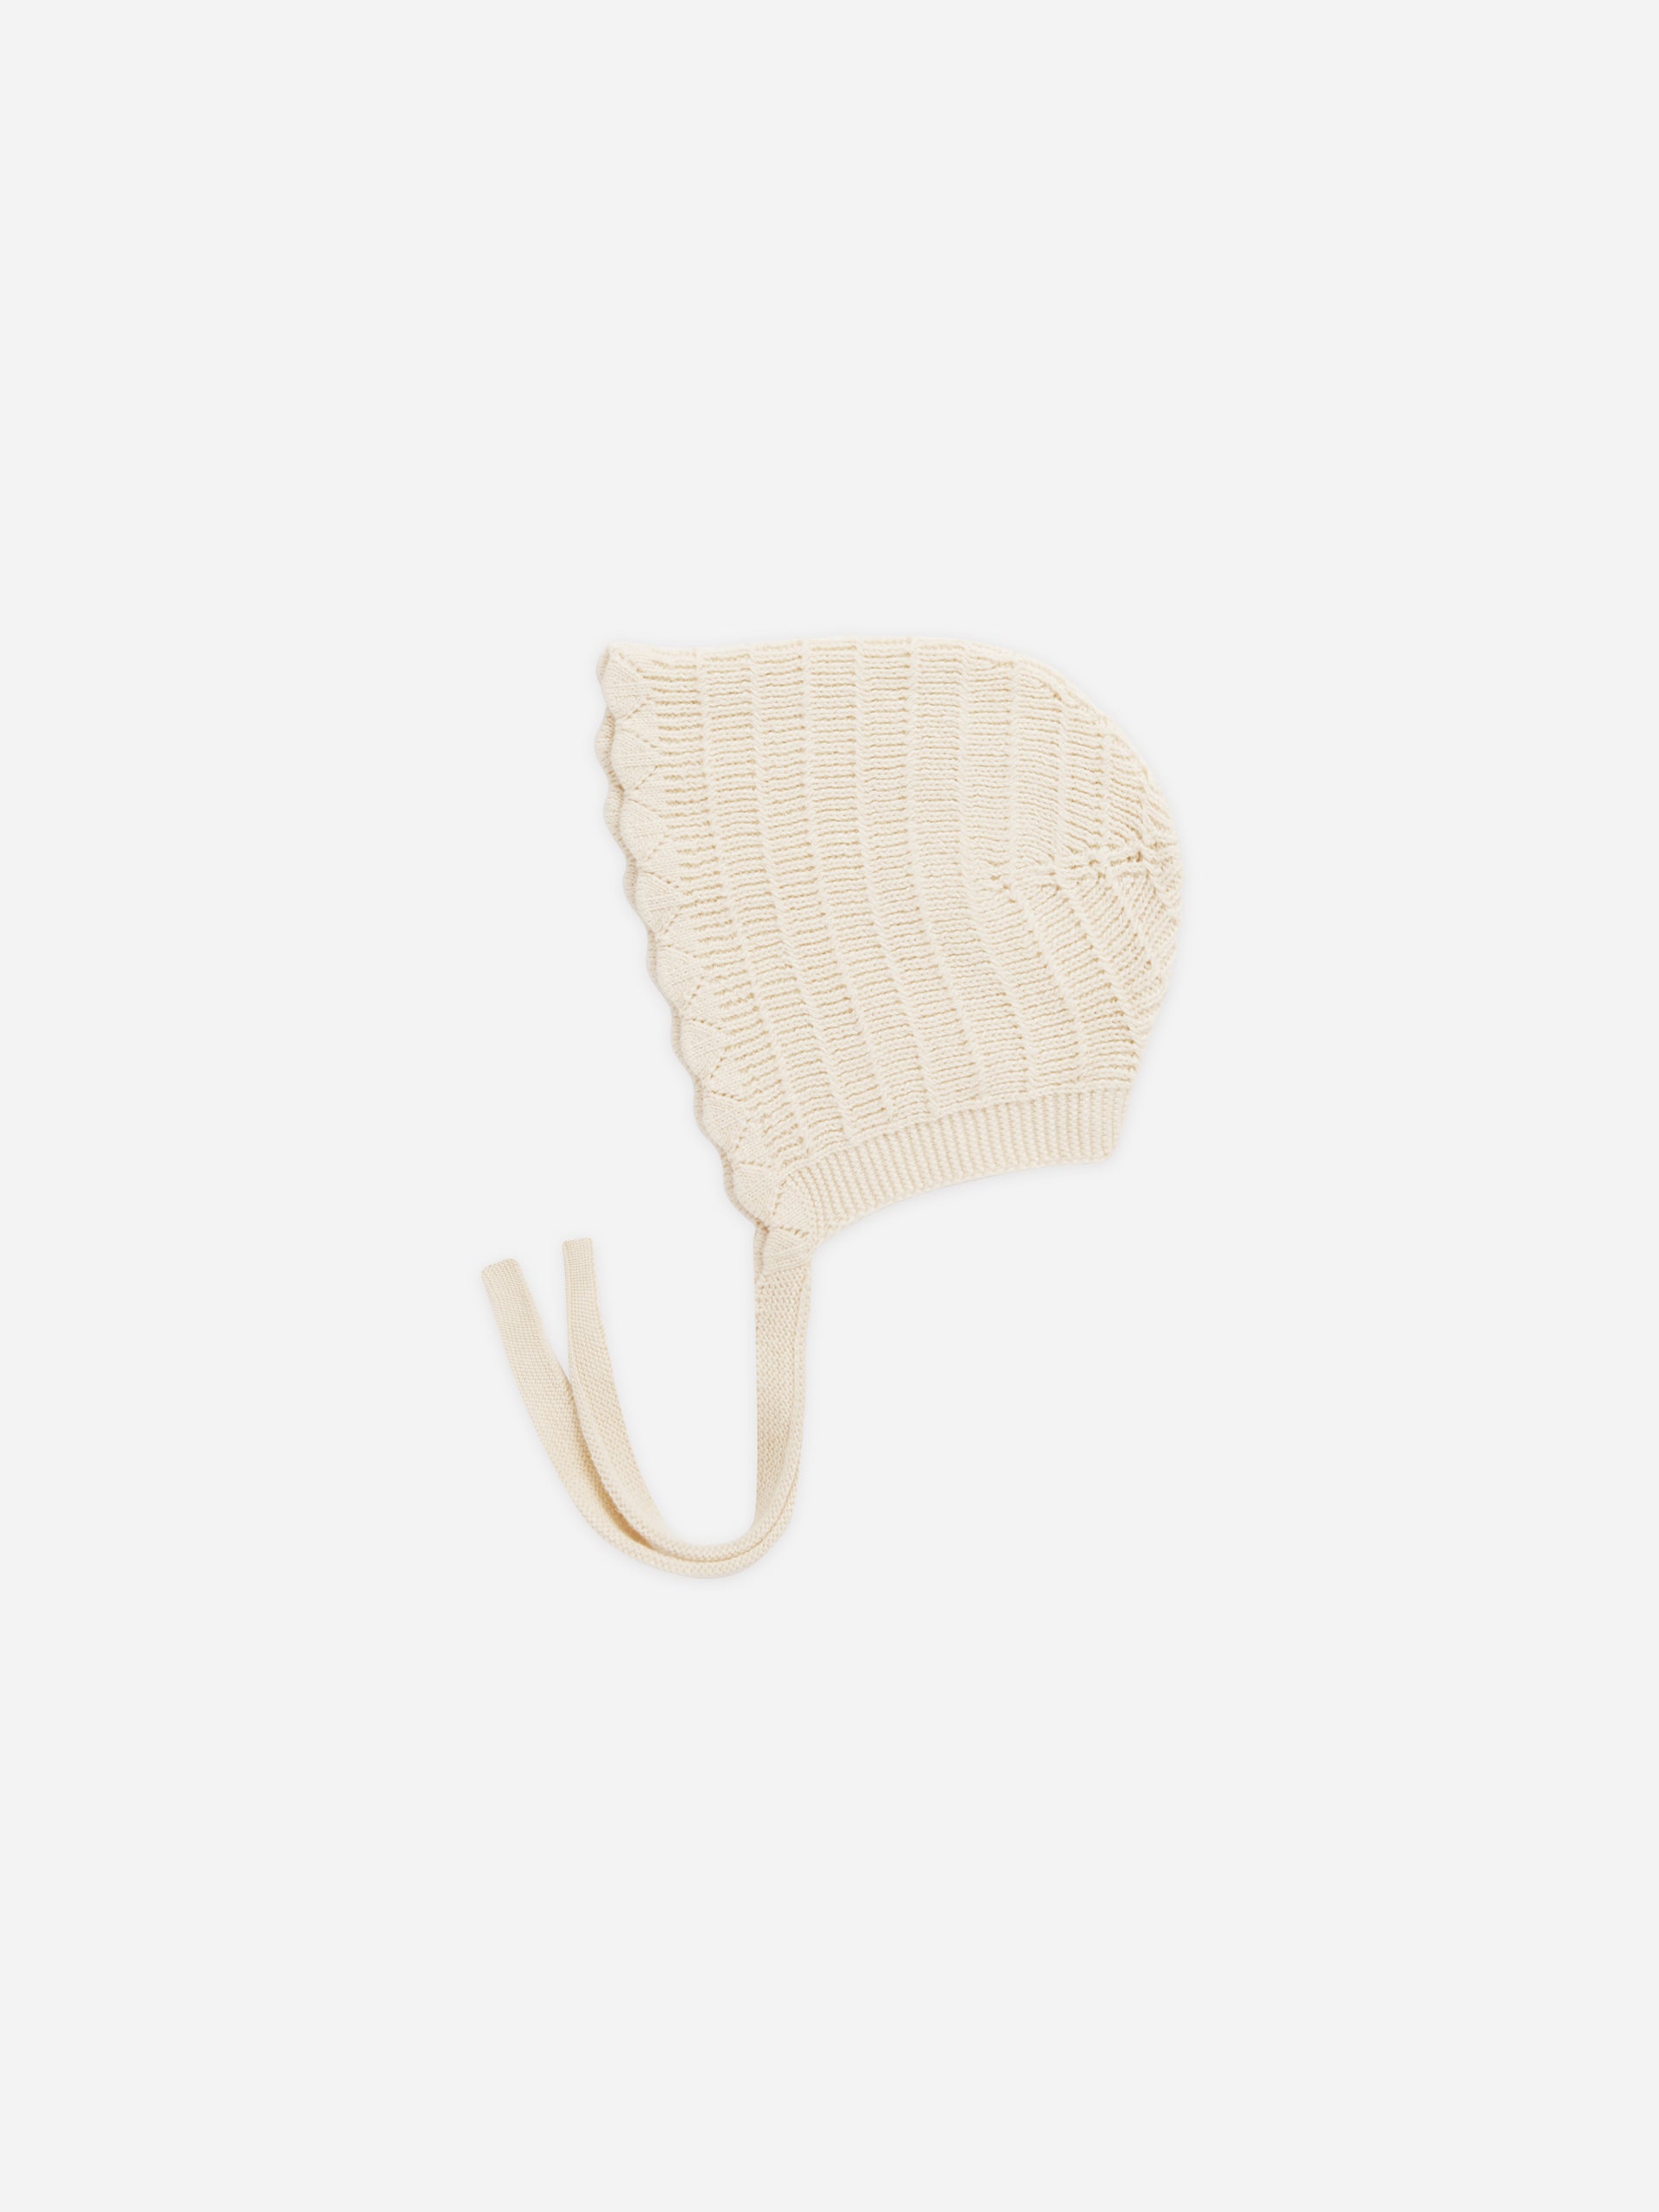 Knit Bonnet || Natural - Rylee + Cru | Kids Clothes | Trendy Baby Clothes | Modern Infant Outfits |